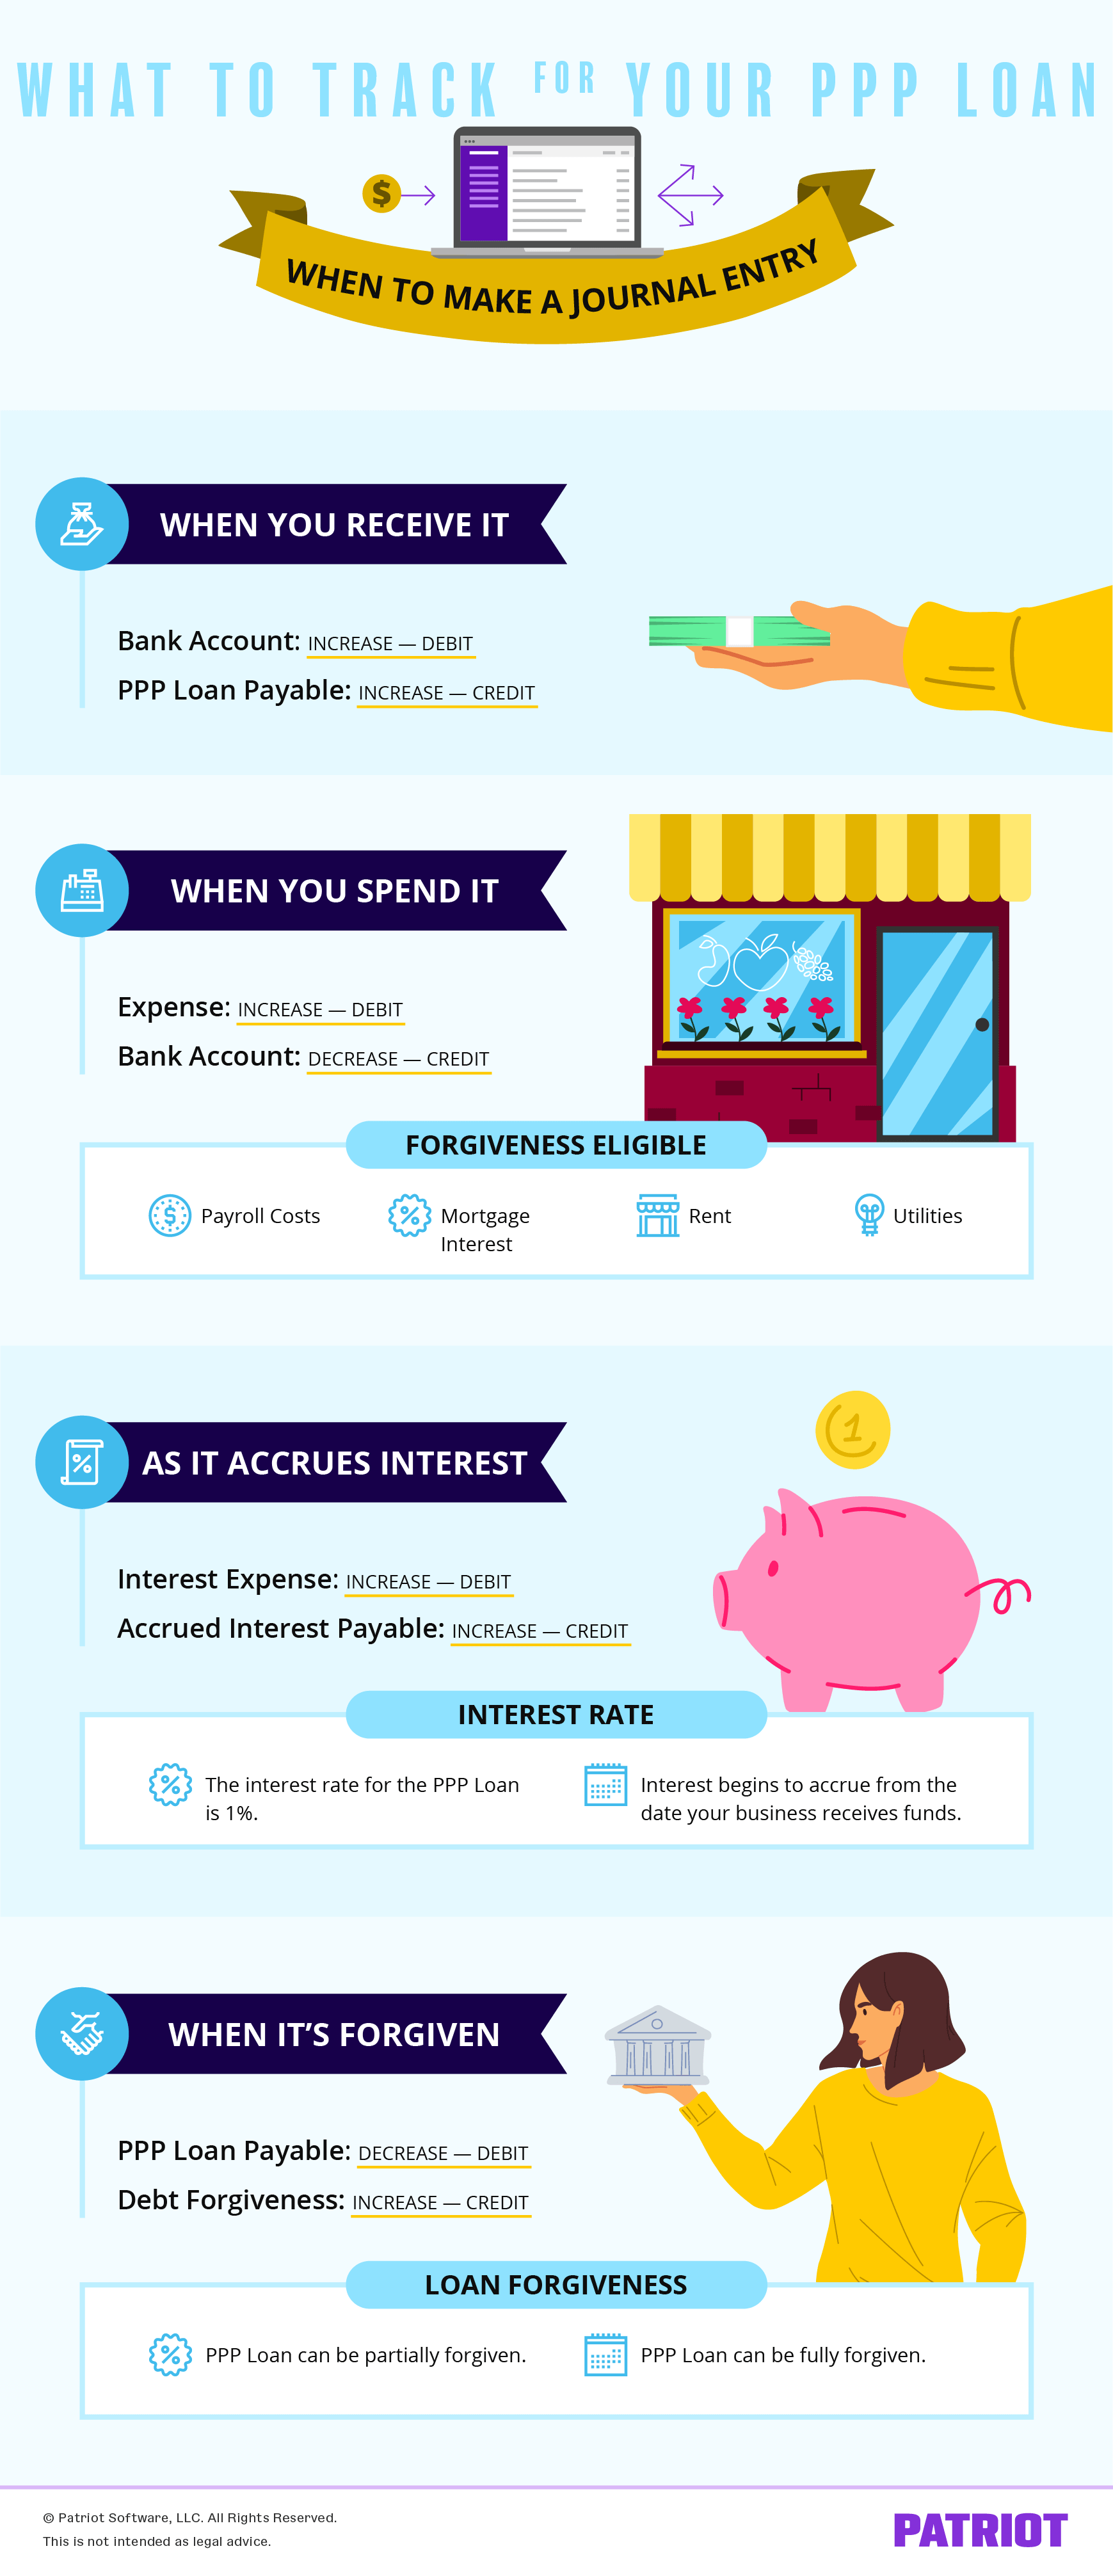 Infographic detailing when to make a journal entry for PPP loan: 1) receiving it 2) spending it 3) accruing interest 4) getting forgiveness 